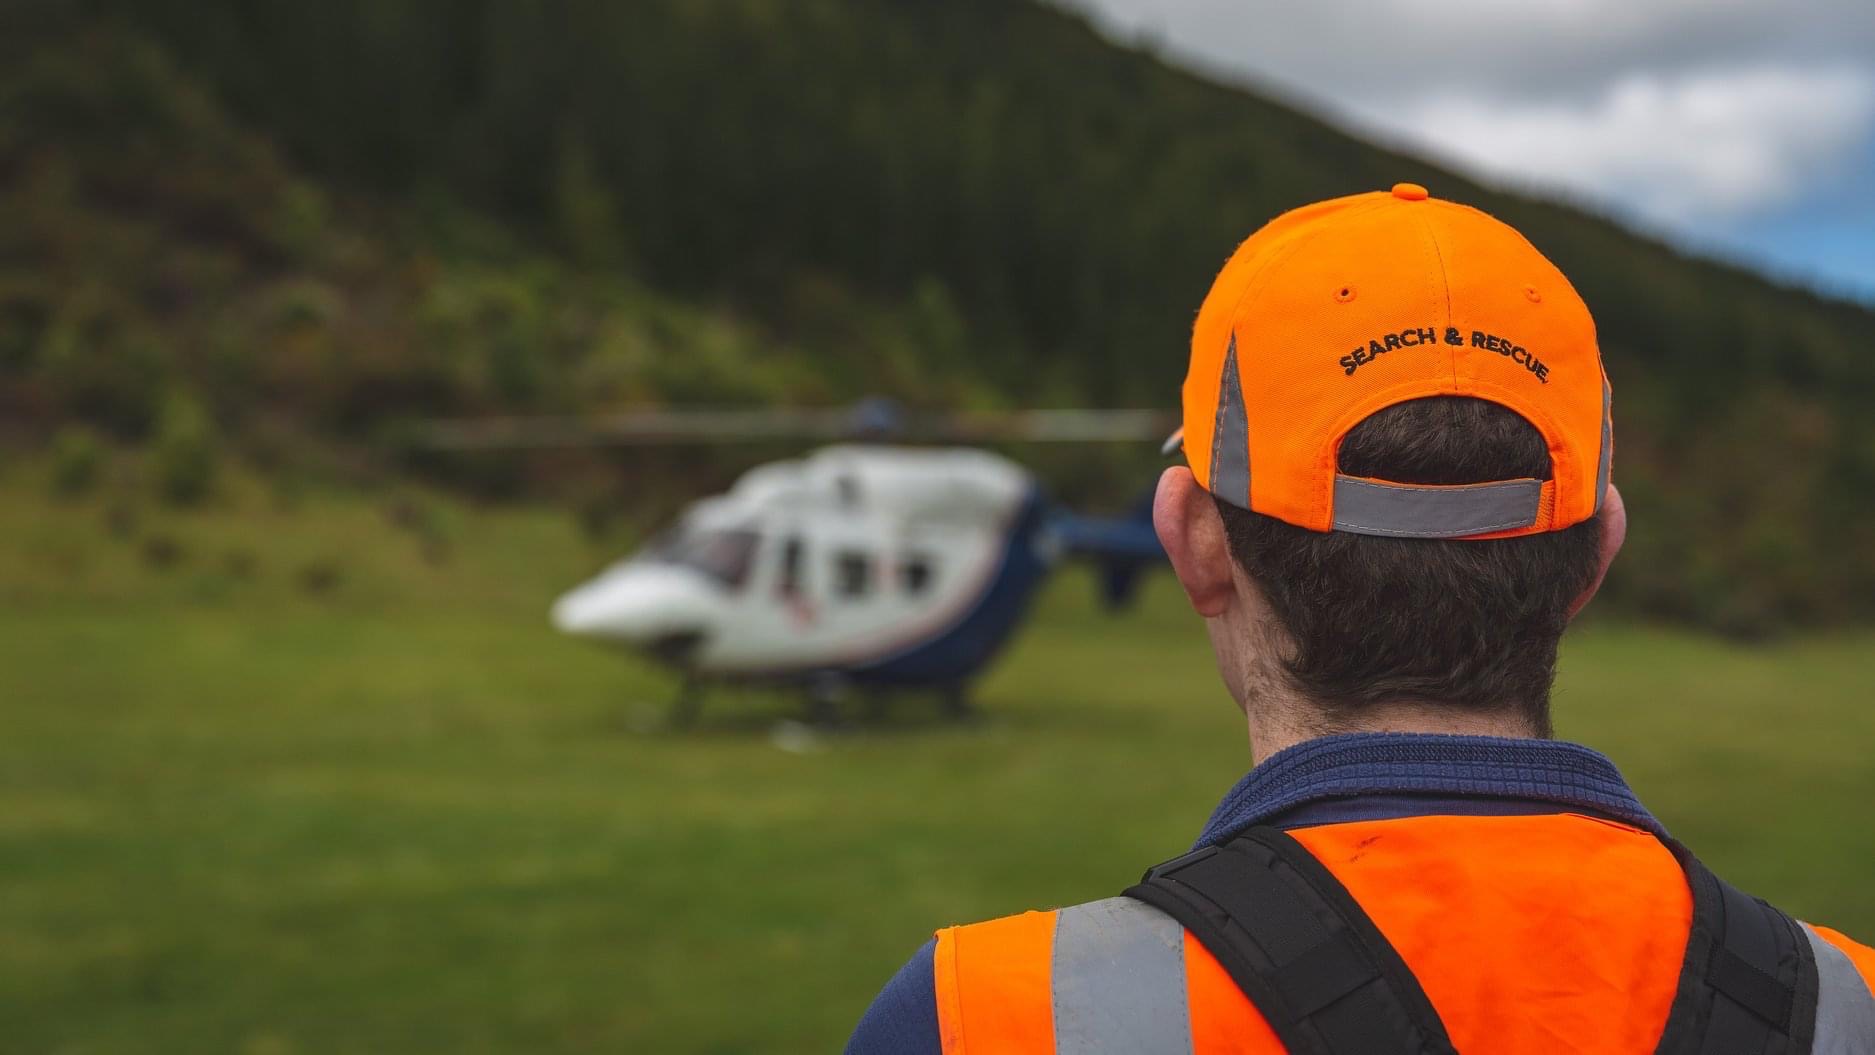 Man wearing hi-vis LandSAR cap and vest. He is standing in front of a rescue helicopter.